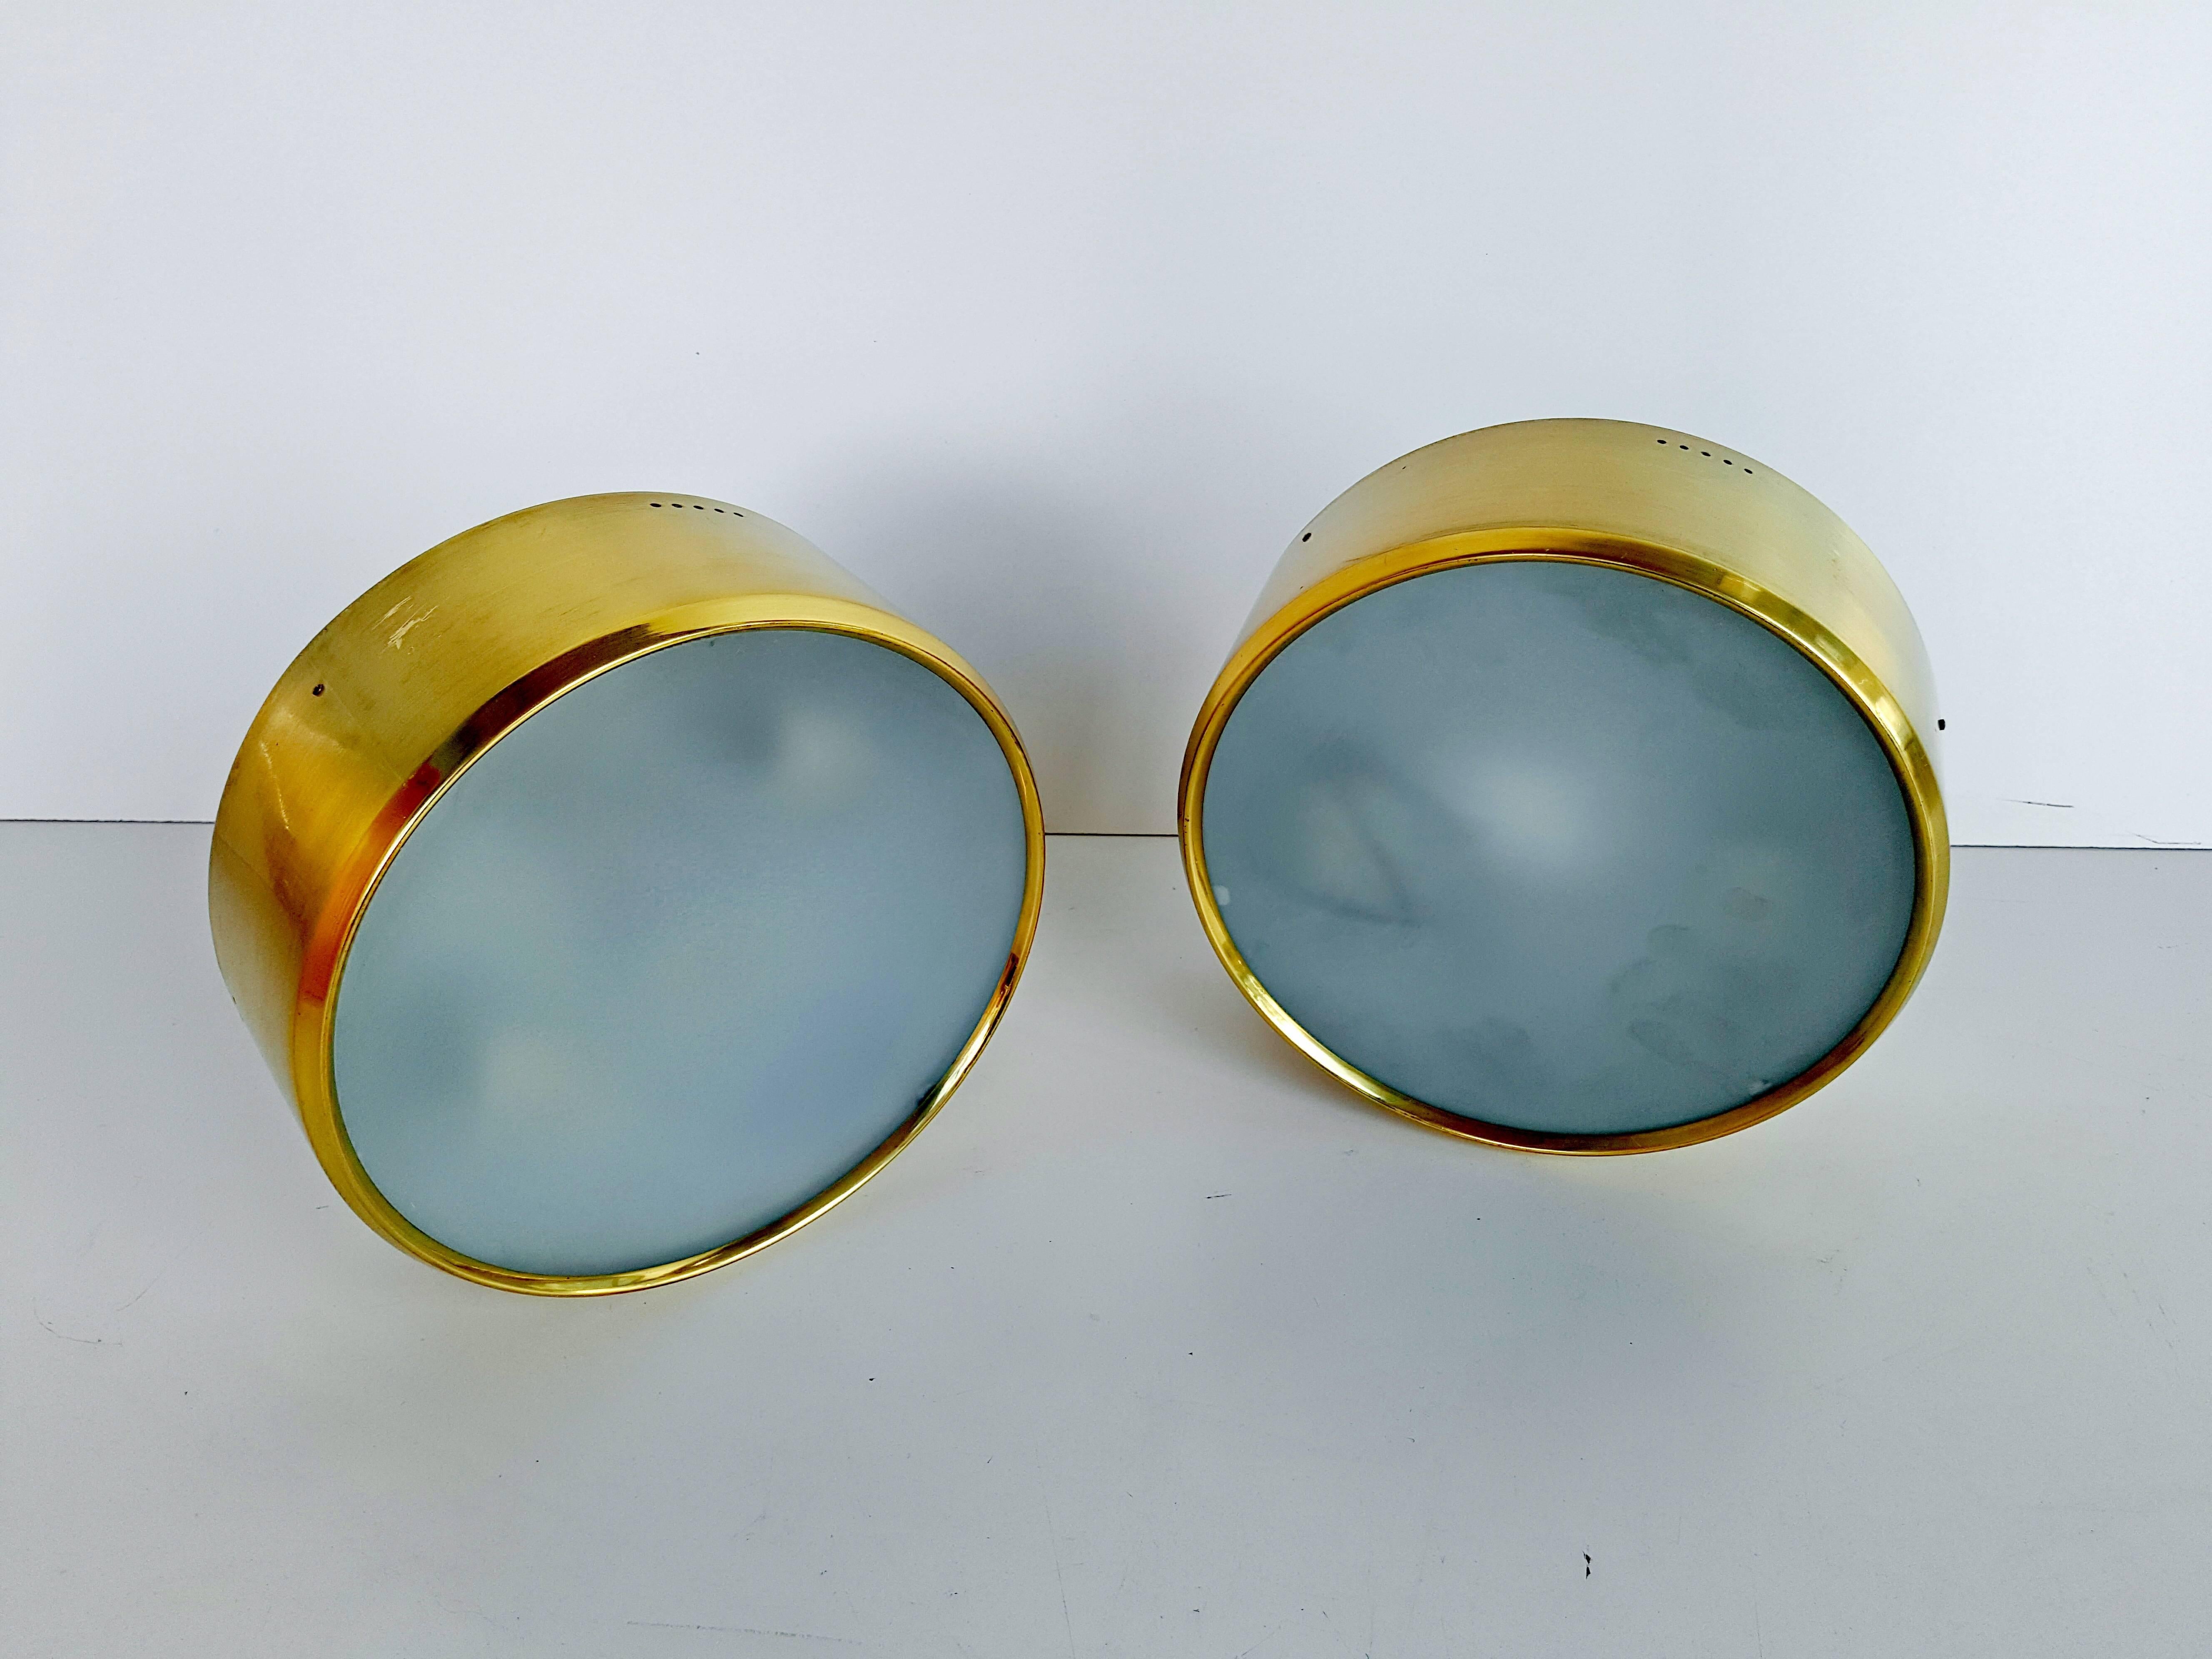 Rare Pair of Brass and Glass Ceiling/Wall Lights by Stilnovo, 1960s For Sale 4